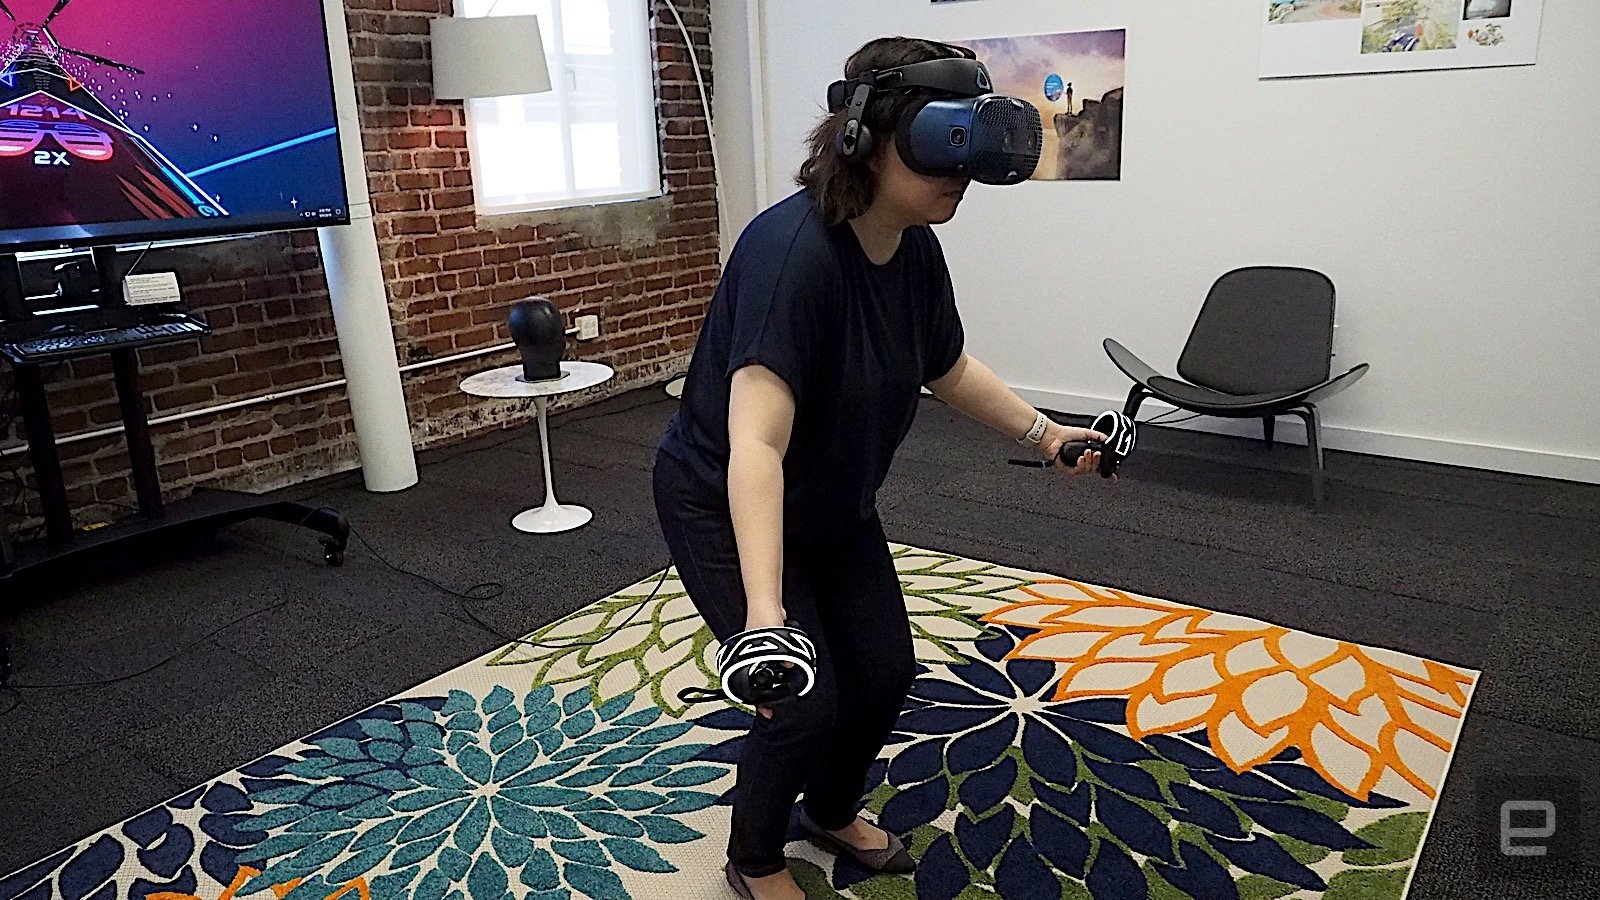 HTC Vive Cosmos hands-on: VR never looked so good | DeviceDaily.com